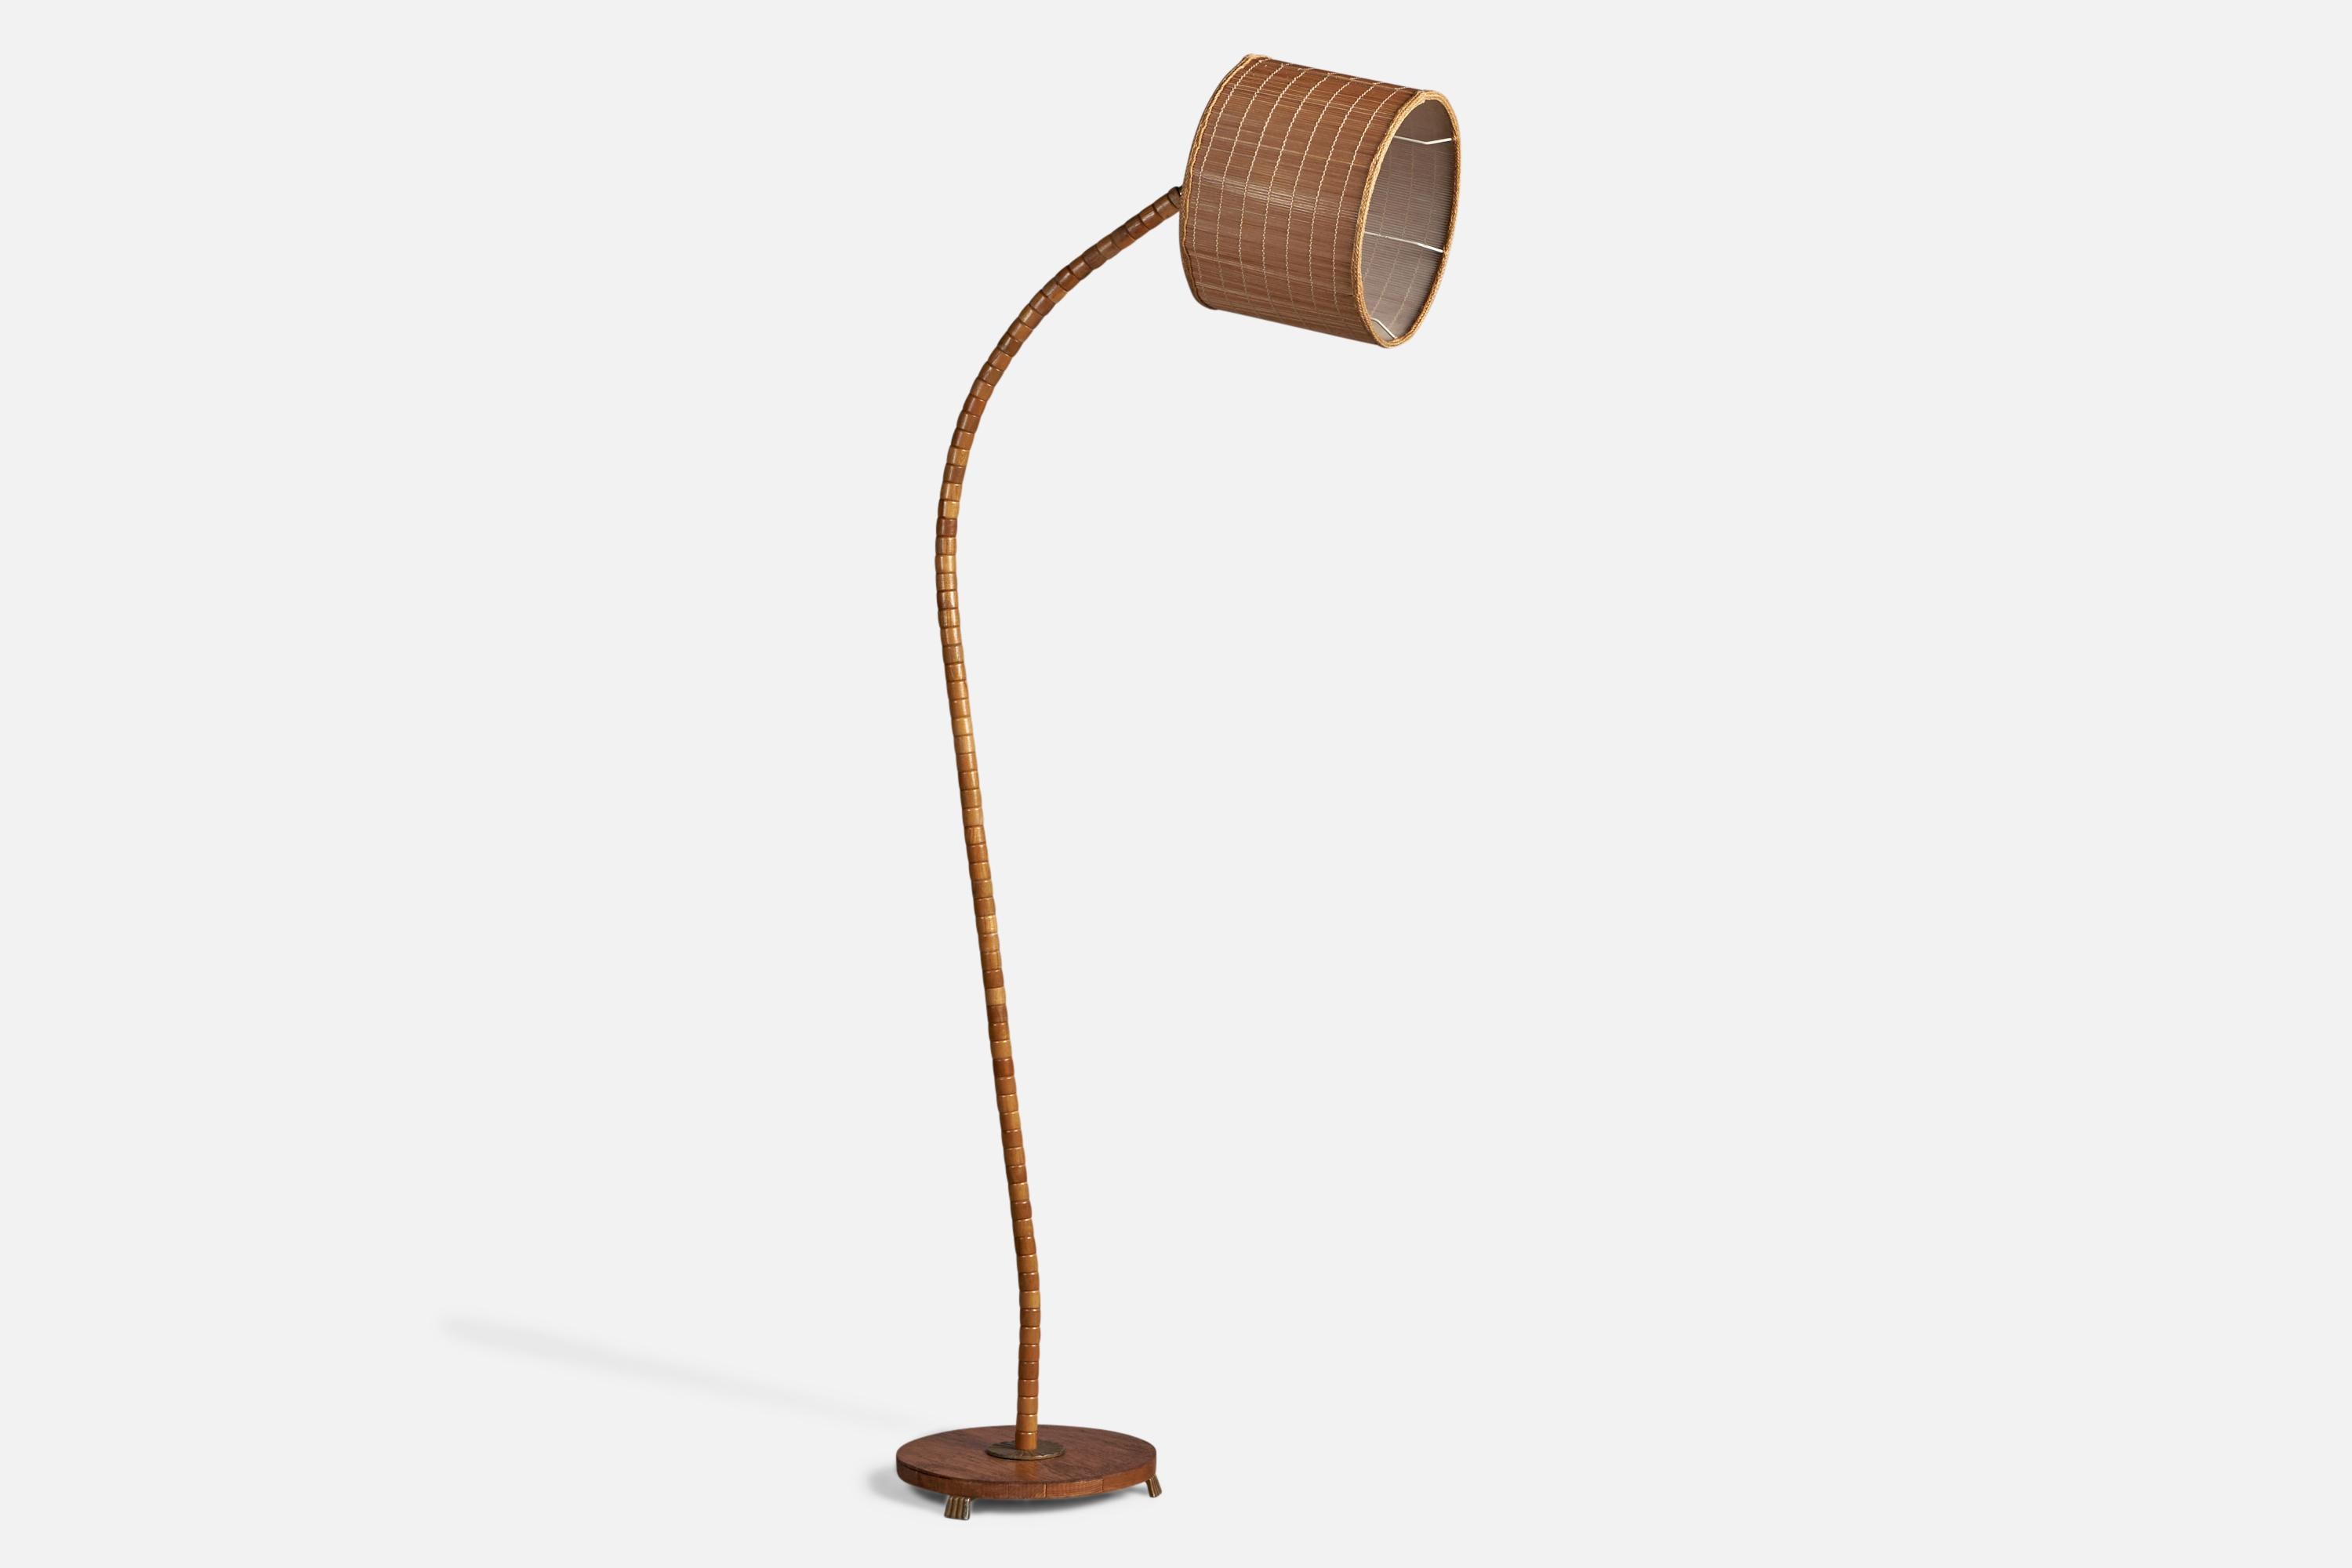 A curved brass, oak and reed floor lamp, designed and produced in Sweden, 1930s.

Overall Dimensions (inches): 70.25